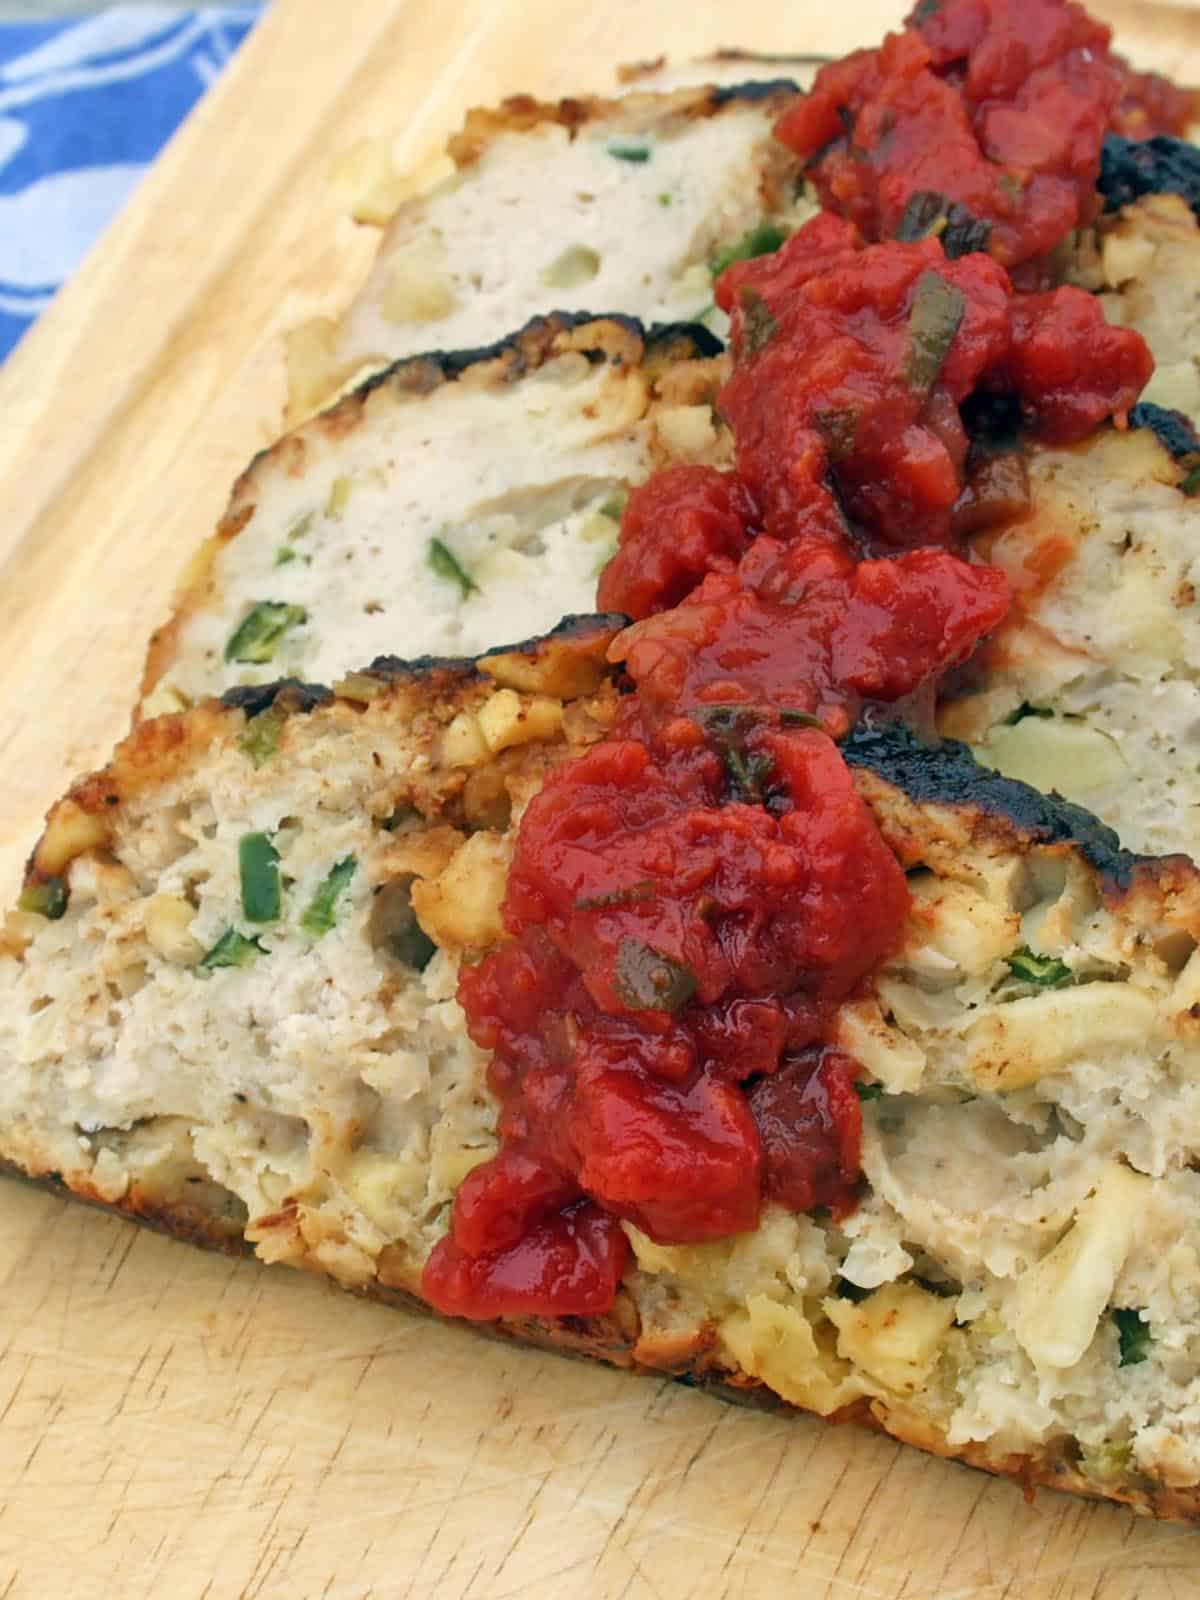 Chicken Apple Meatloaf cut into slices on a wooden cutting board